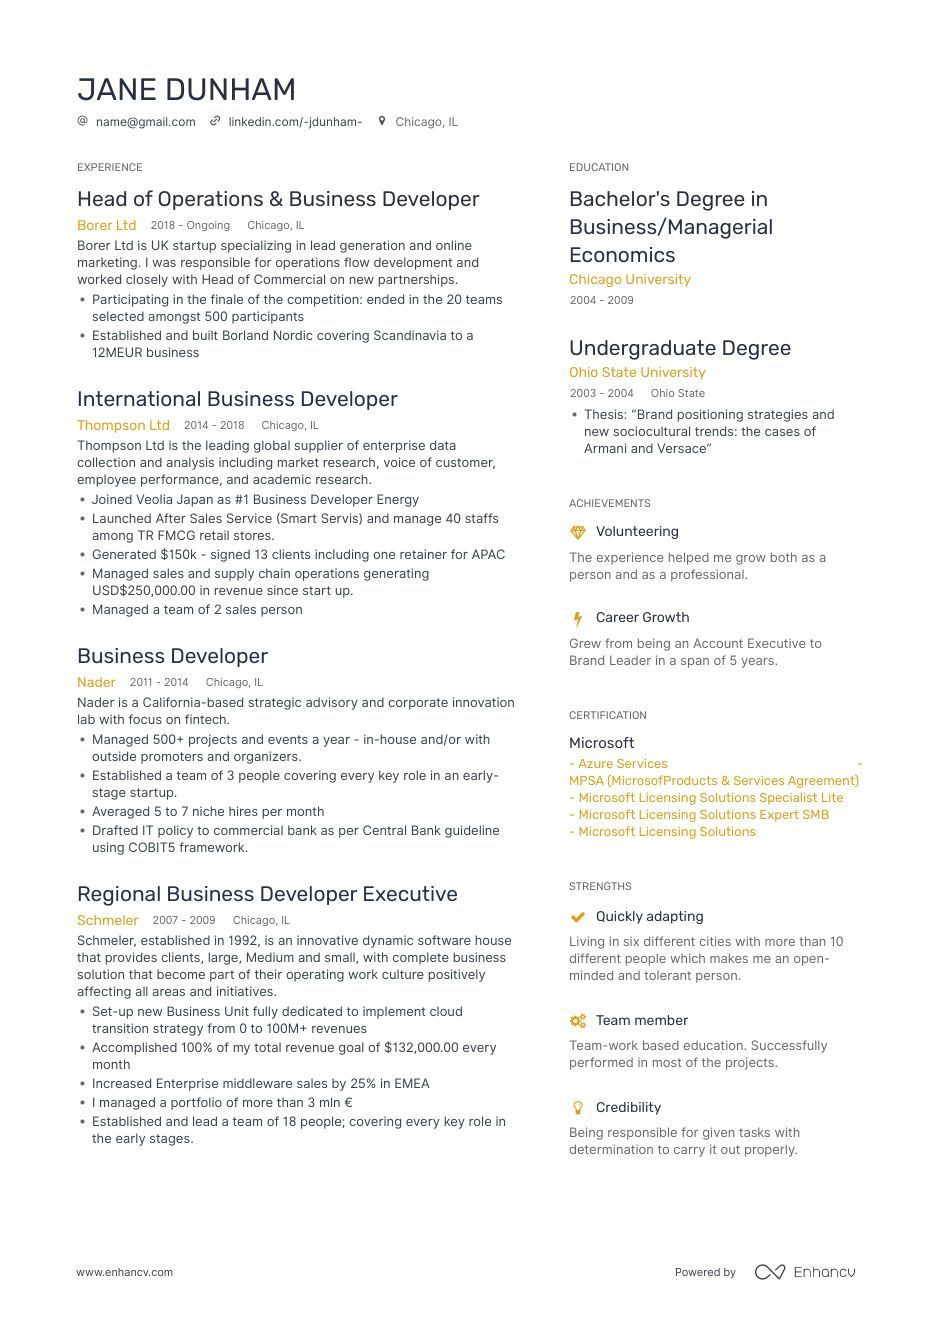 International Business Development Consultant Resume Sample Business Development Resume Samples [4 Templates   Tips] (layout …